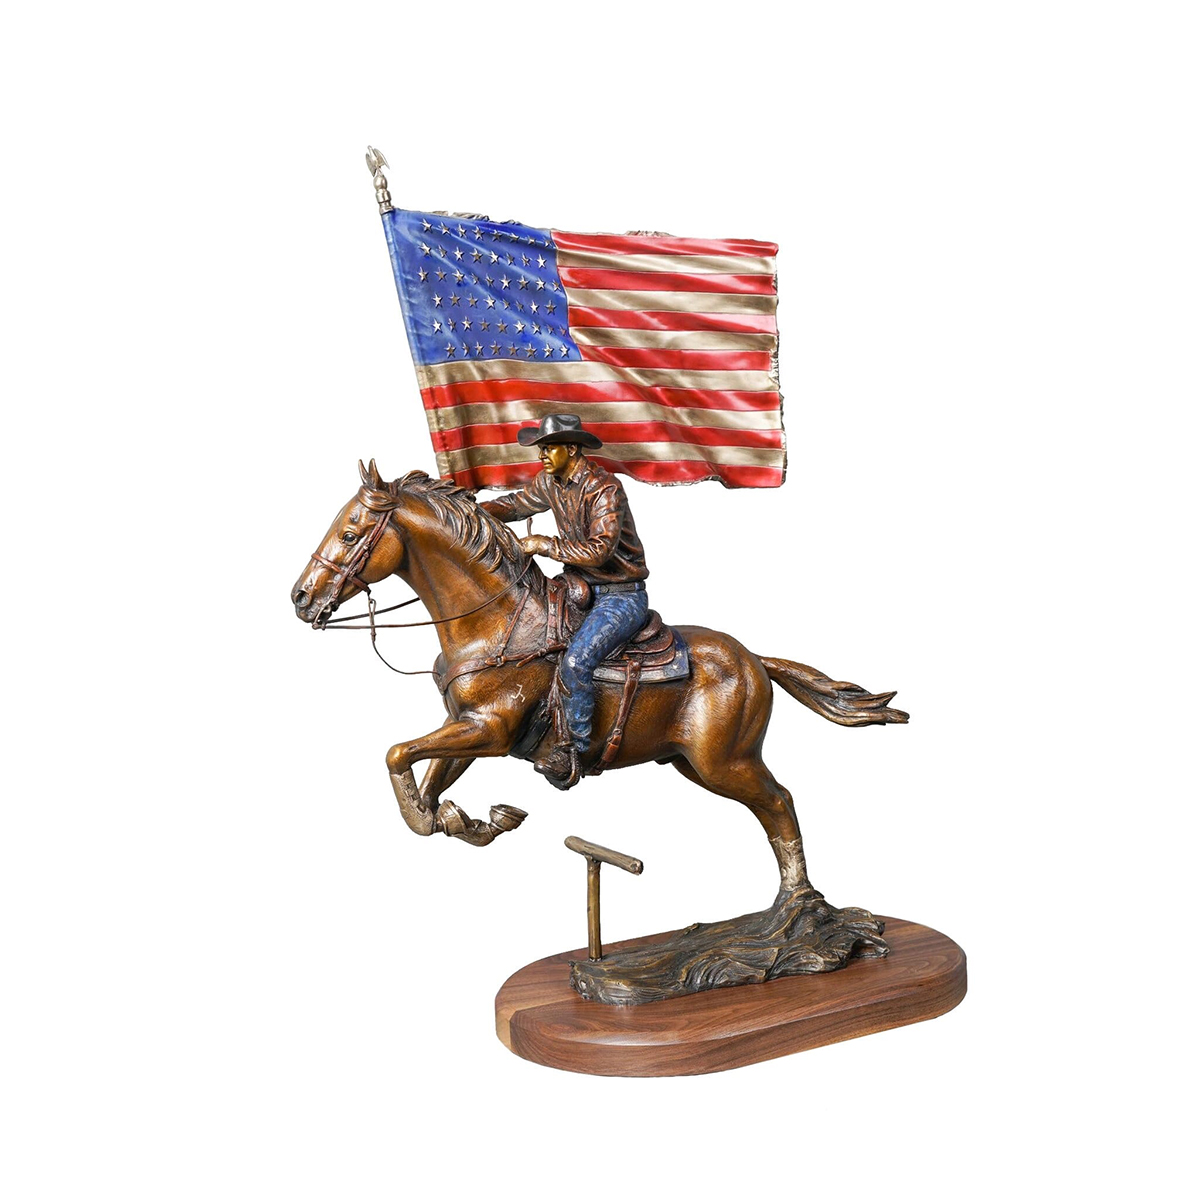 Cowboy Figurines for Sale